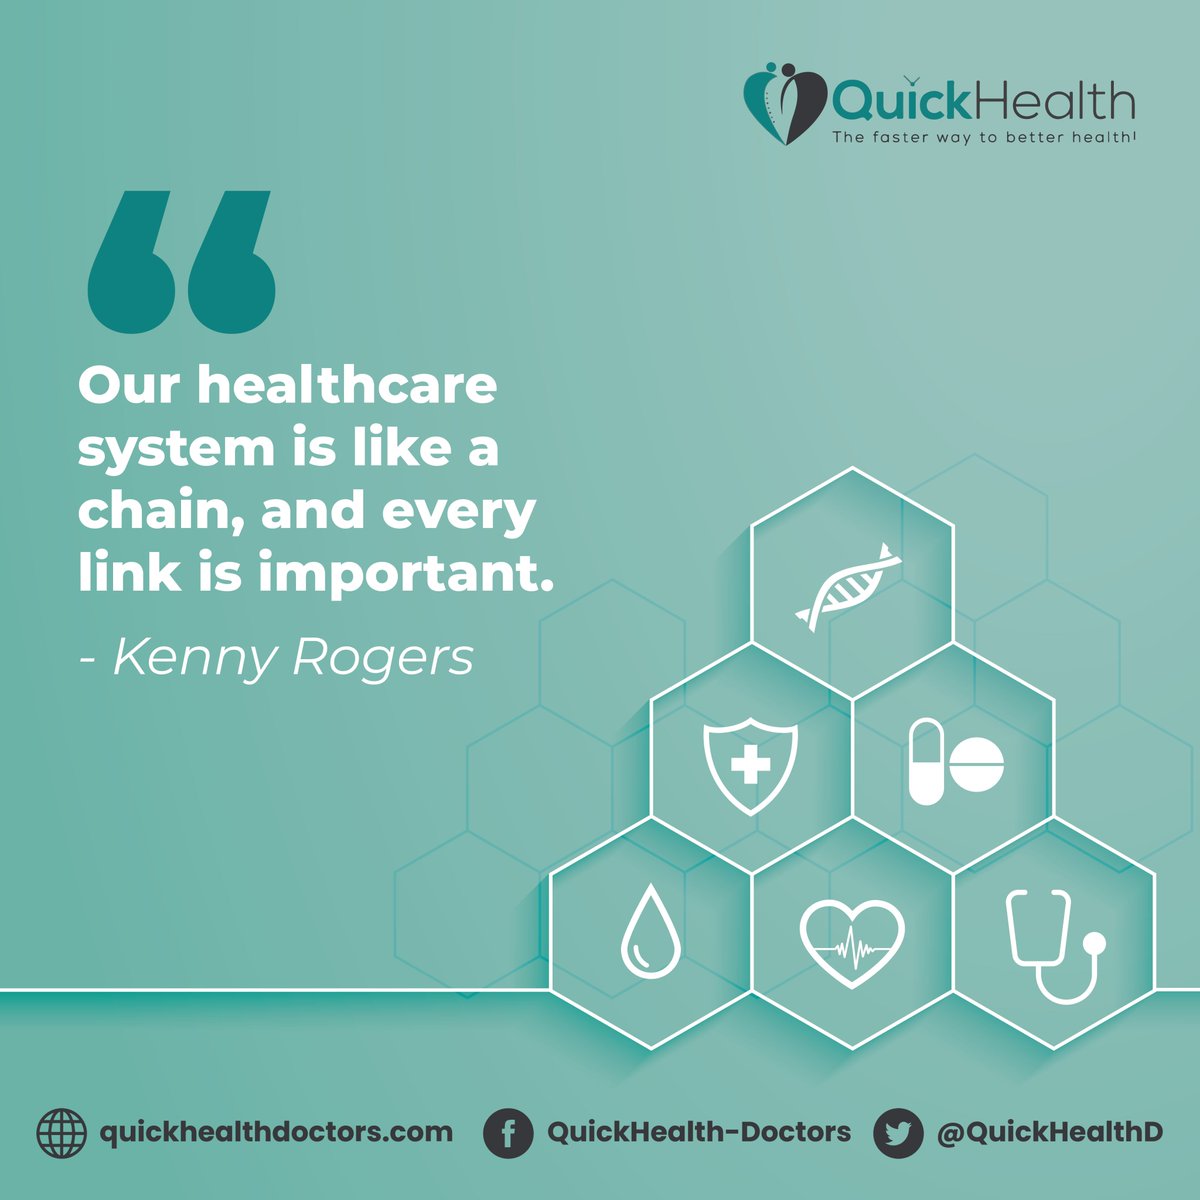 Rise, shine, and conquer the week ahead. Quick Health Doctors are here to kickstart your week with a dose of wellness wisdom. Let's make this week a healthy success story together.
#HealthyMonday #QuickHealthDoctors #QuickHealthDoctors #TelehealthHeroes #MondayMotivation